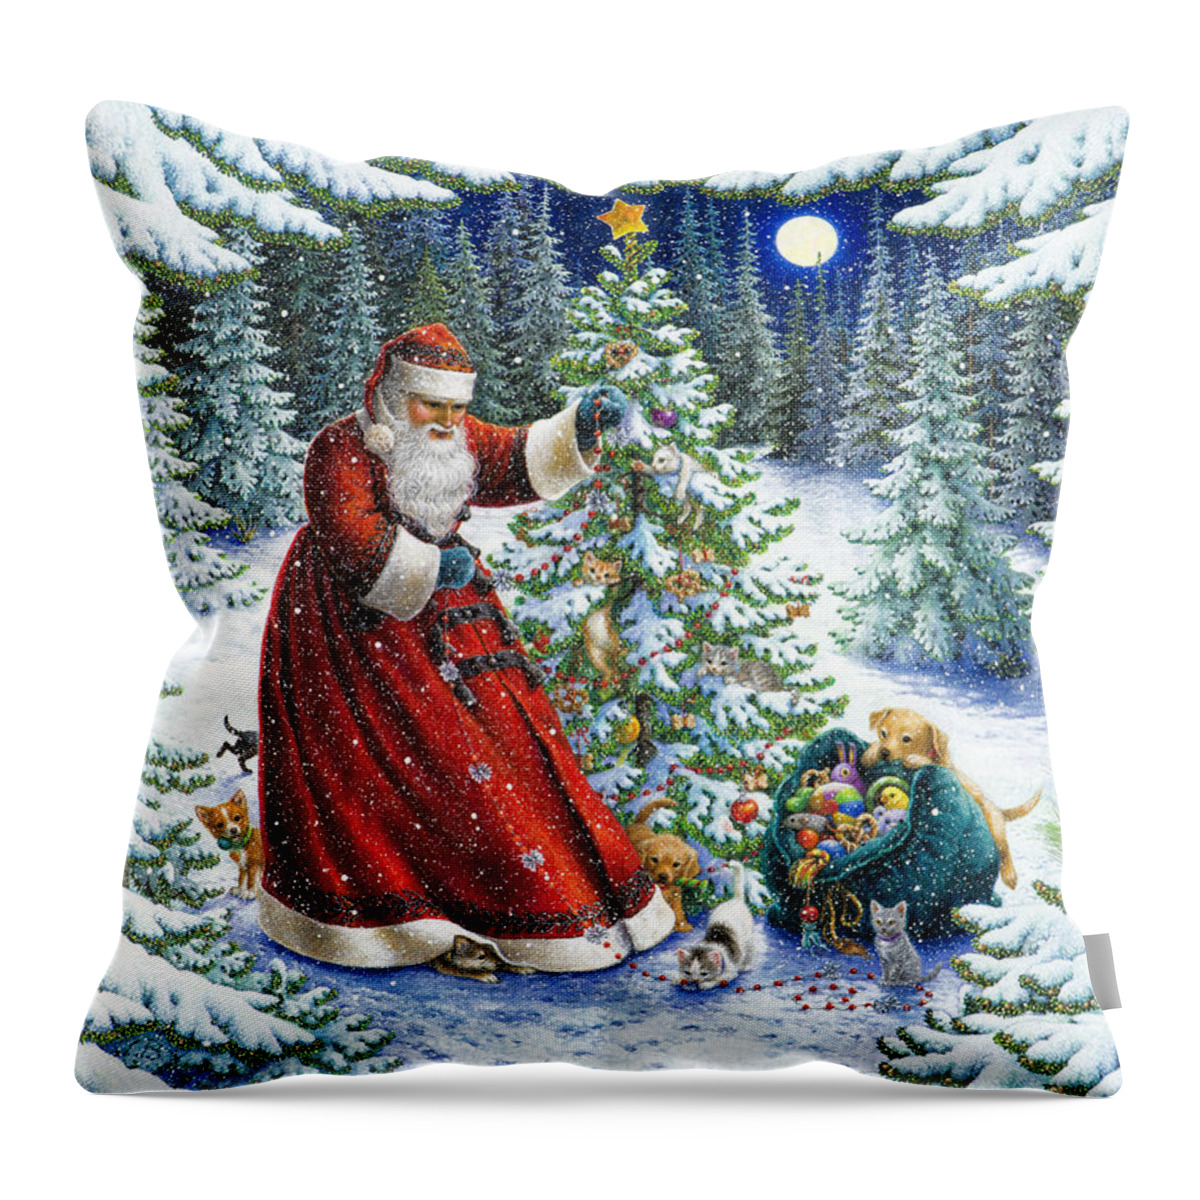 Santa Claus Throw Pillow featuring the painting Santa's Little Helpers by Lynn Bywaters